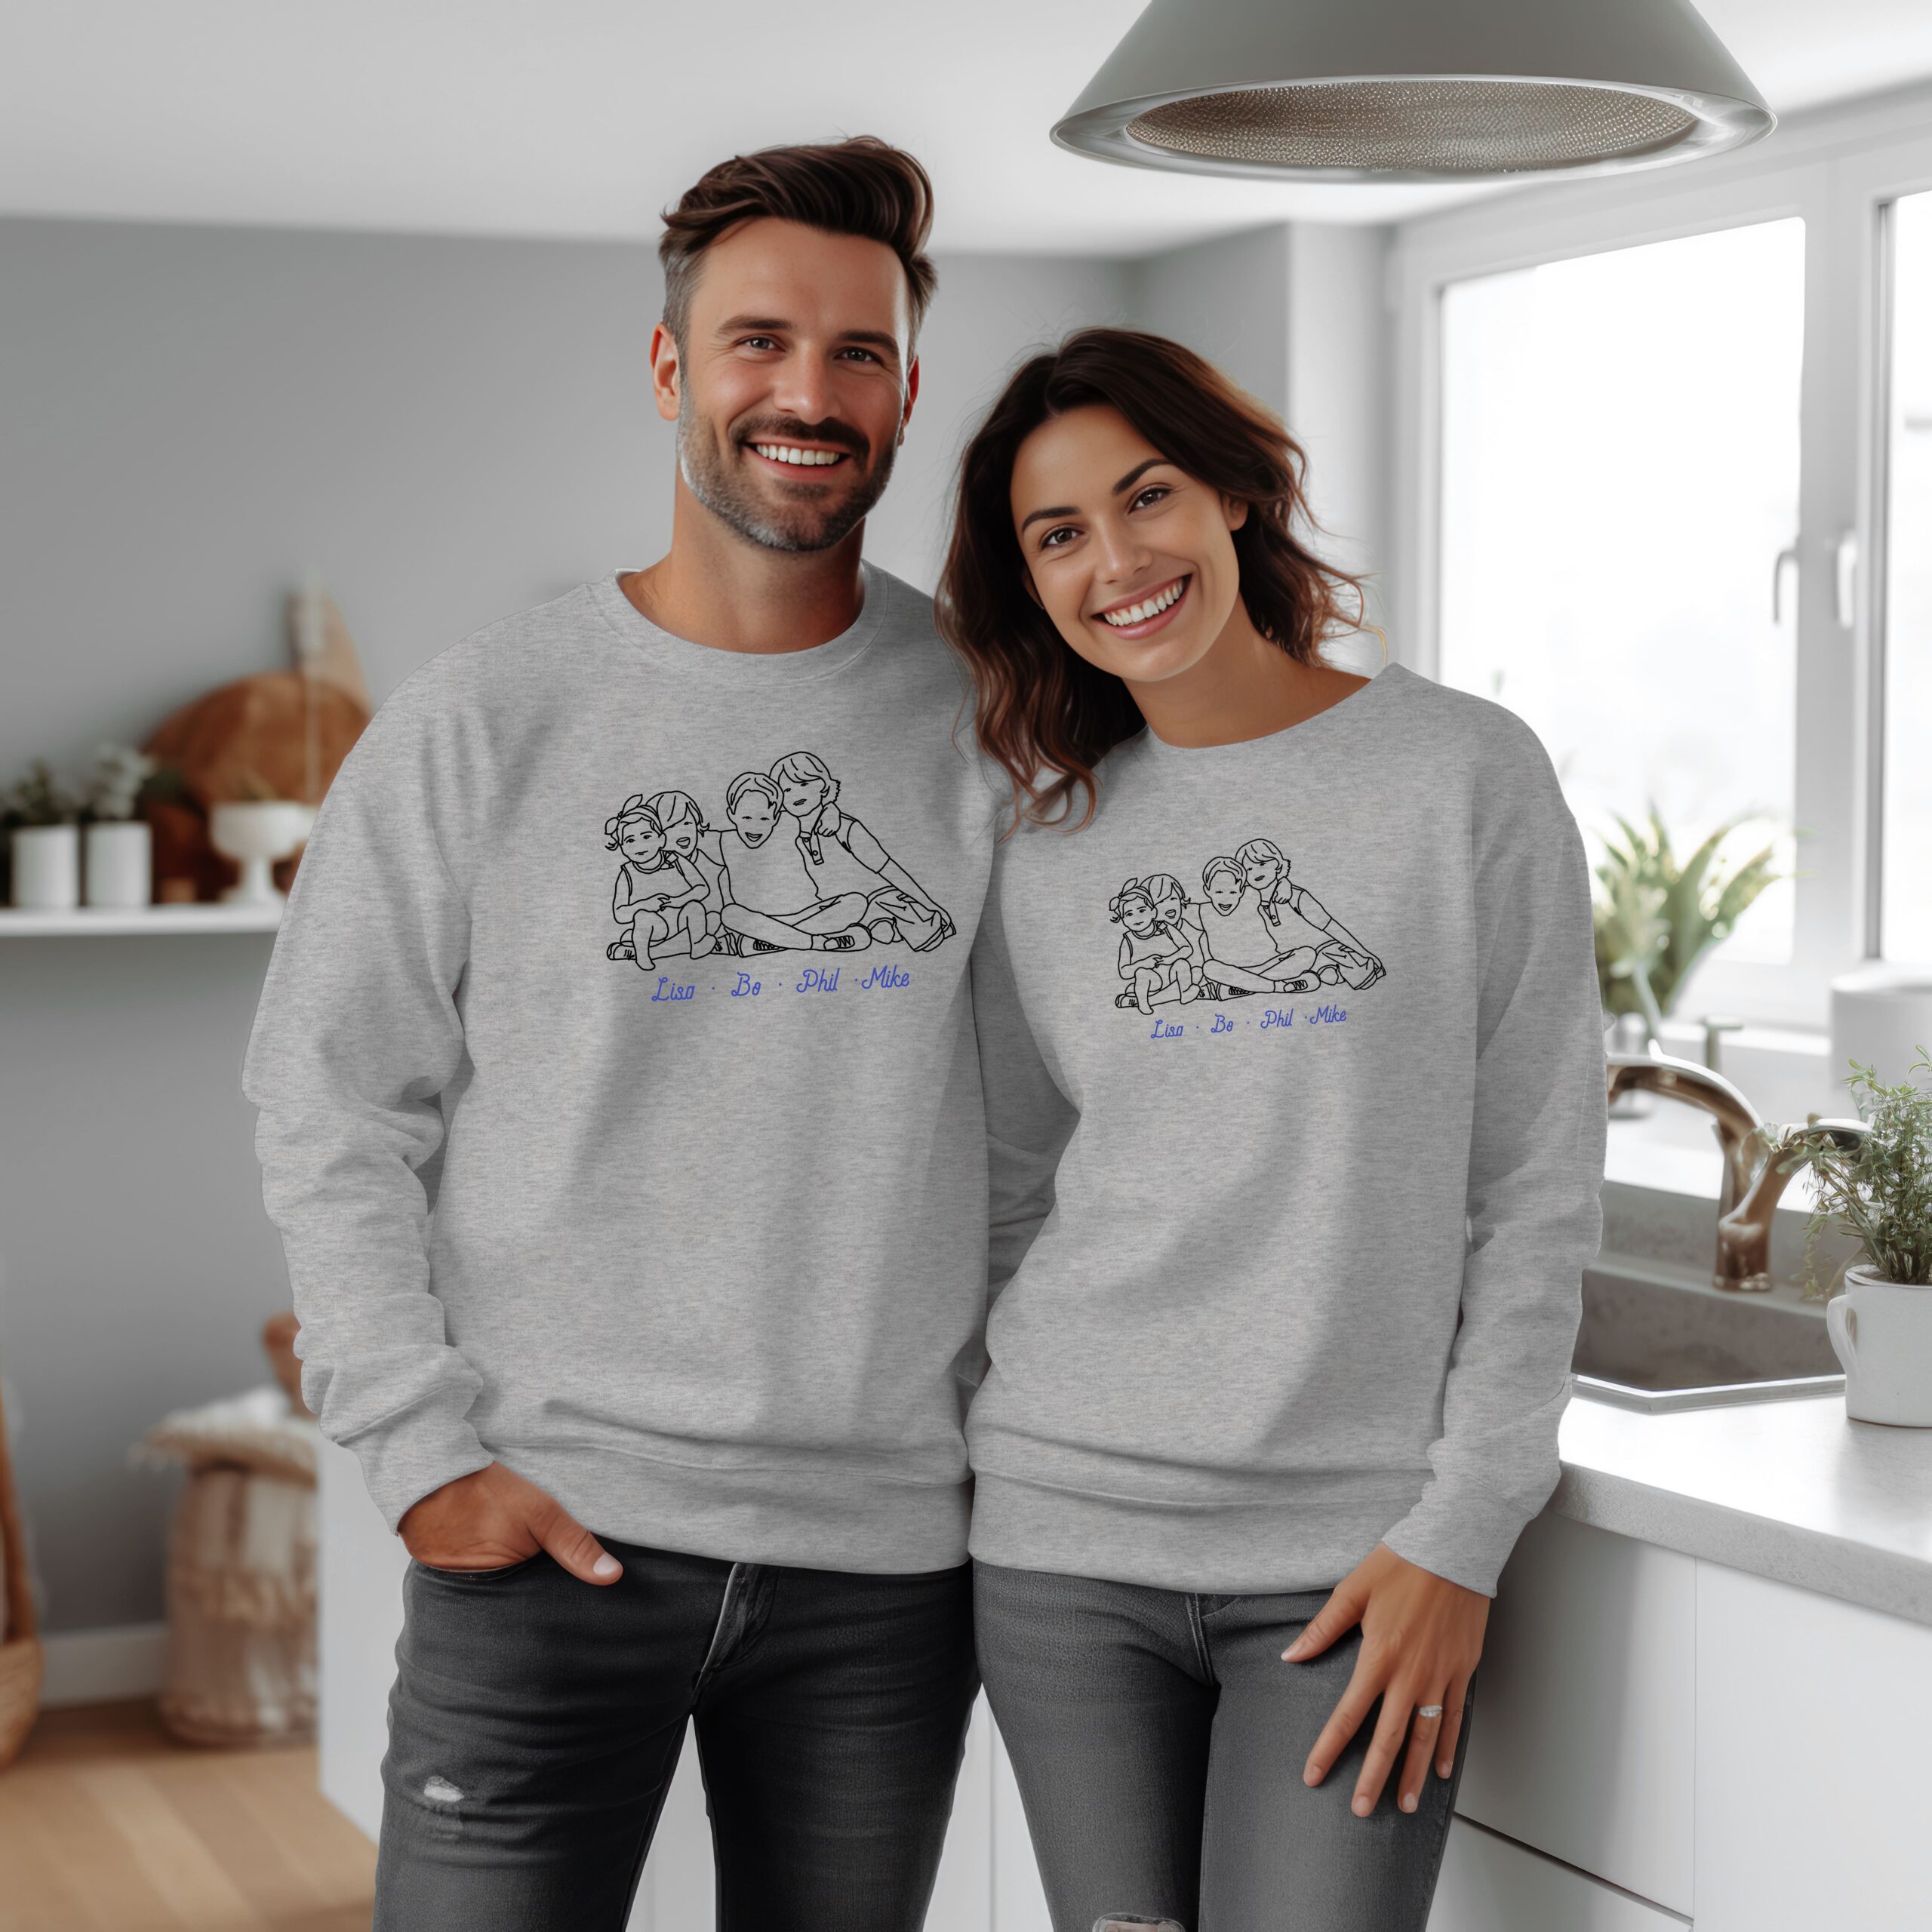 Custom matching crew neck sweatshirts for mom and dad with line art portrait of the kids and their names ideal gift